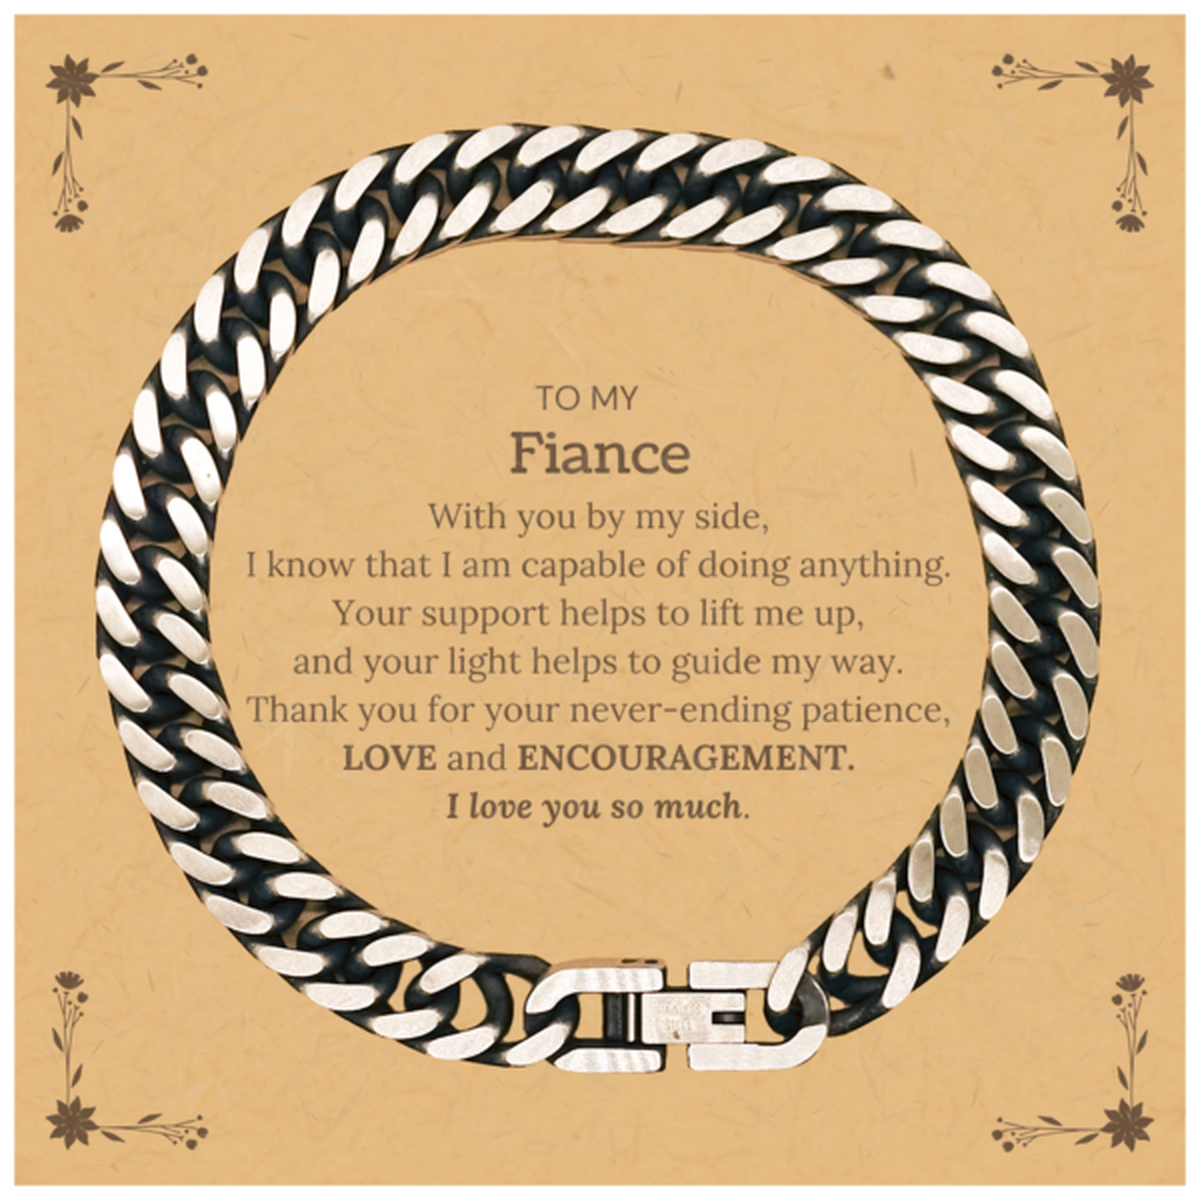 Appreciation Fiance Cuban Link Chain Bracelet Gifts, To My Fiance Birthday Christmas Wedding Keepsake Gifts for Fiance With you by my side, I know that I am capable of doing anything. I love you so much